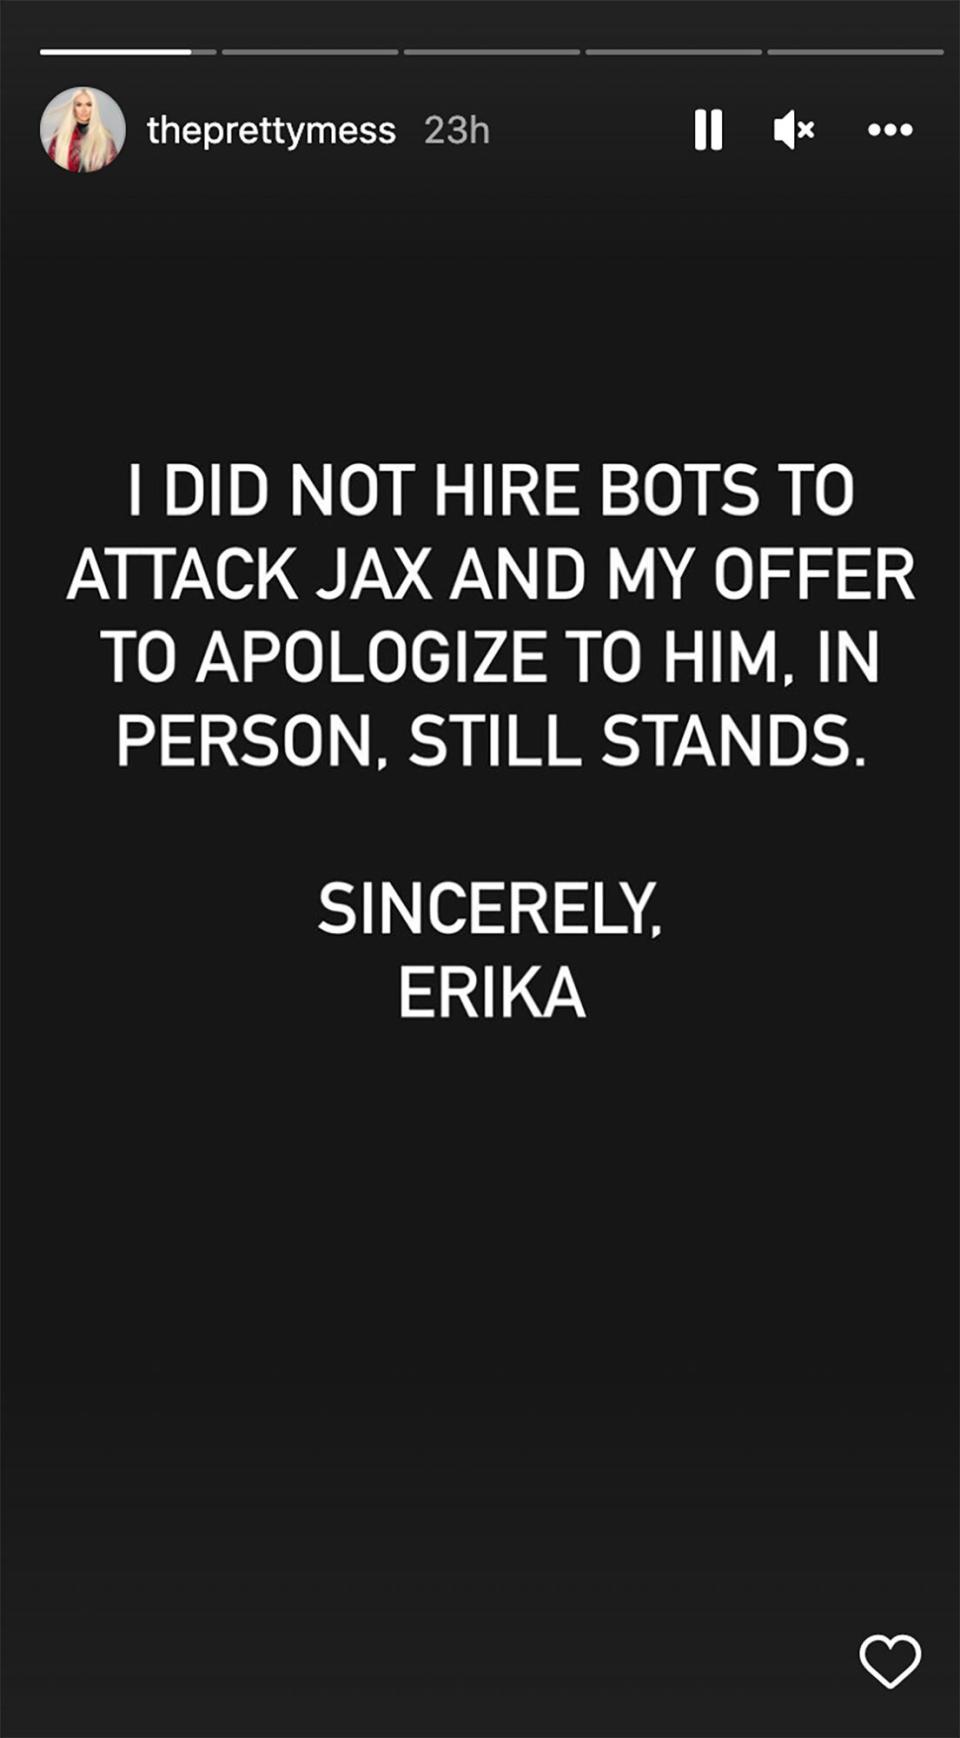 Erika Girardi Says She 'Did Not Hire Bots to Attack' Garcelle Beauvais' 14-Year-Old Son Jax. https://www.instagram.com/theprettymess/?hl=en